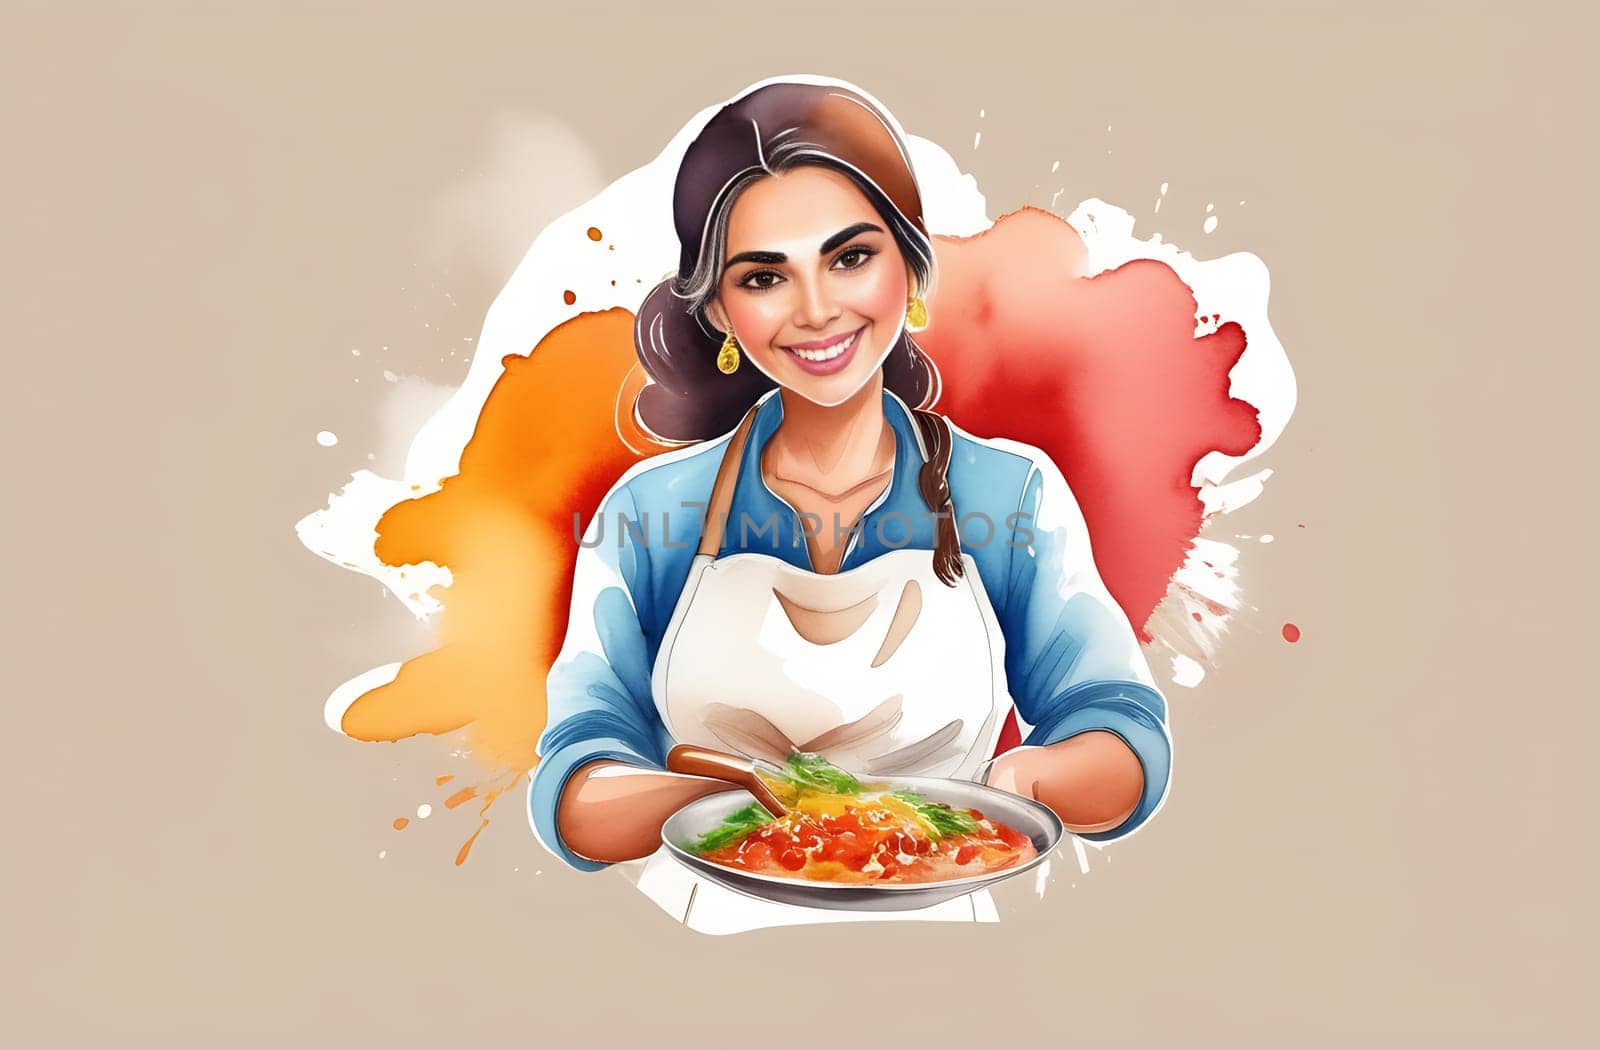 Smiling sweet Mexican woman presents Latin American cuisine, illustration style.